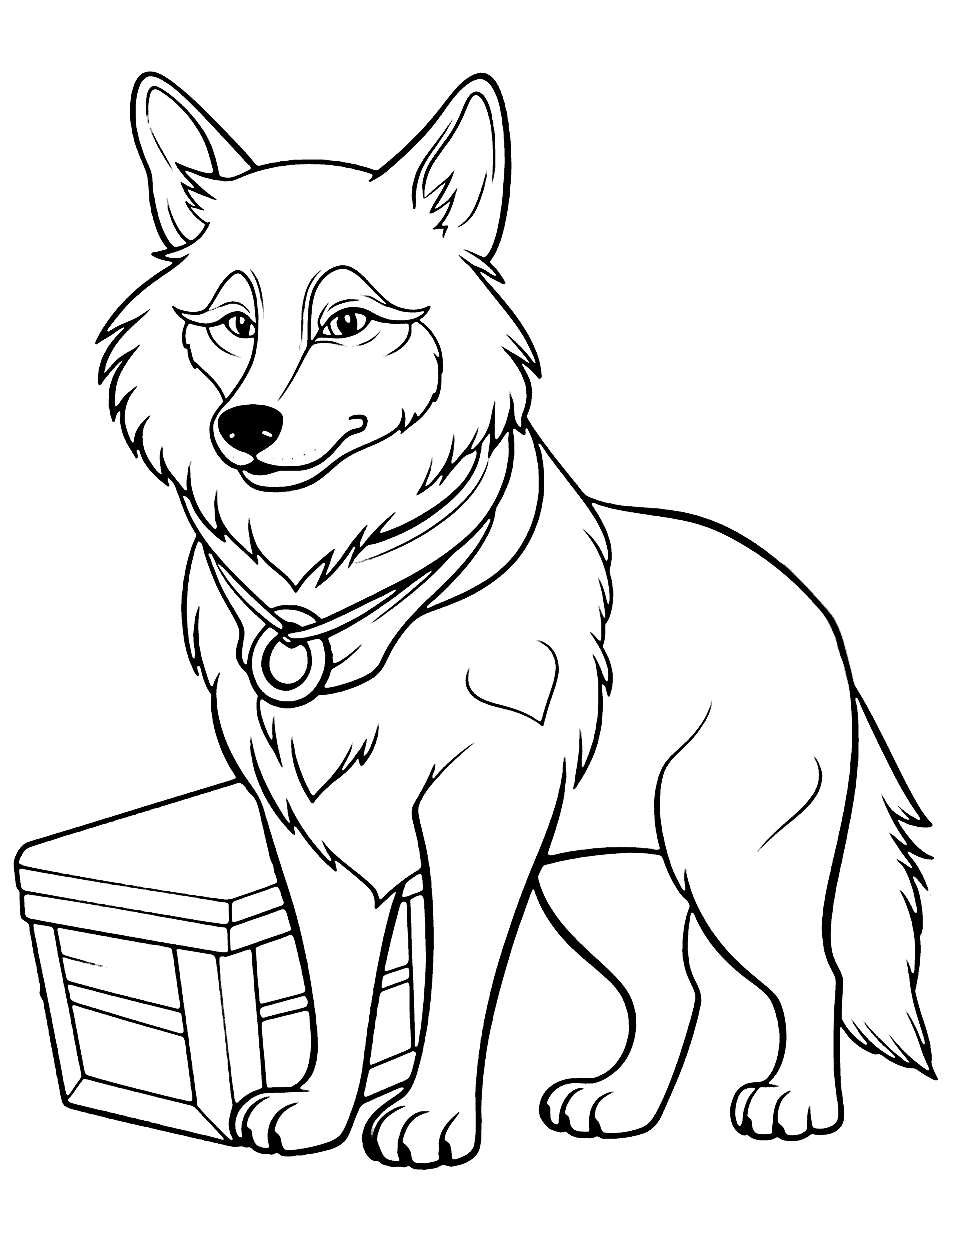 Pirate Wolf Coloring Page - A pirate wolf guarding a treasure chest.